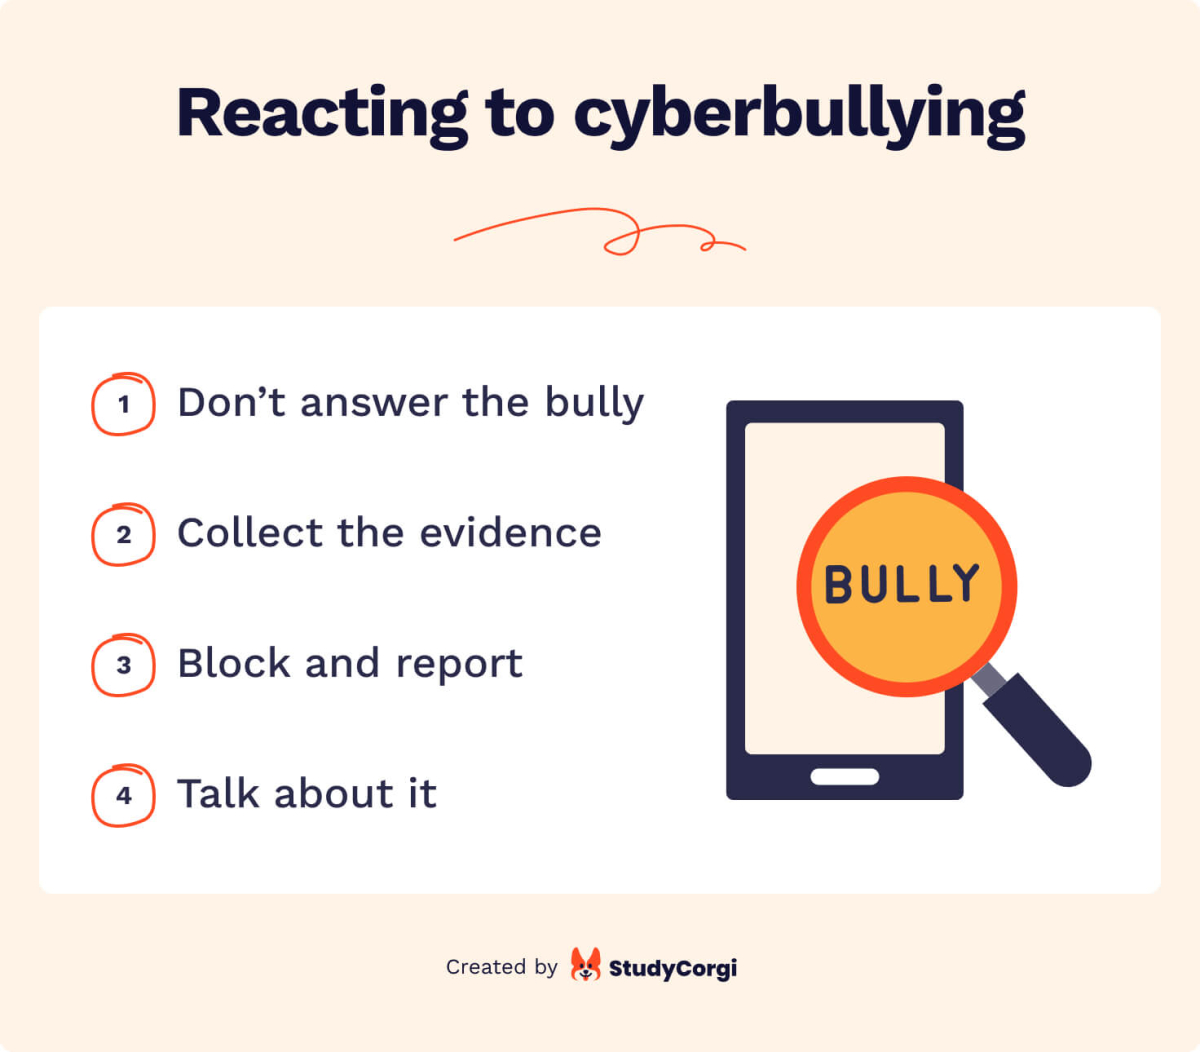 The picture lists 4 tips on reacting to cyberbullying.